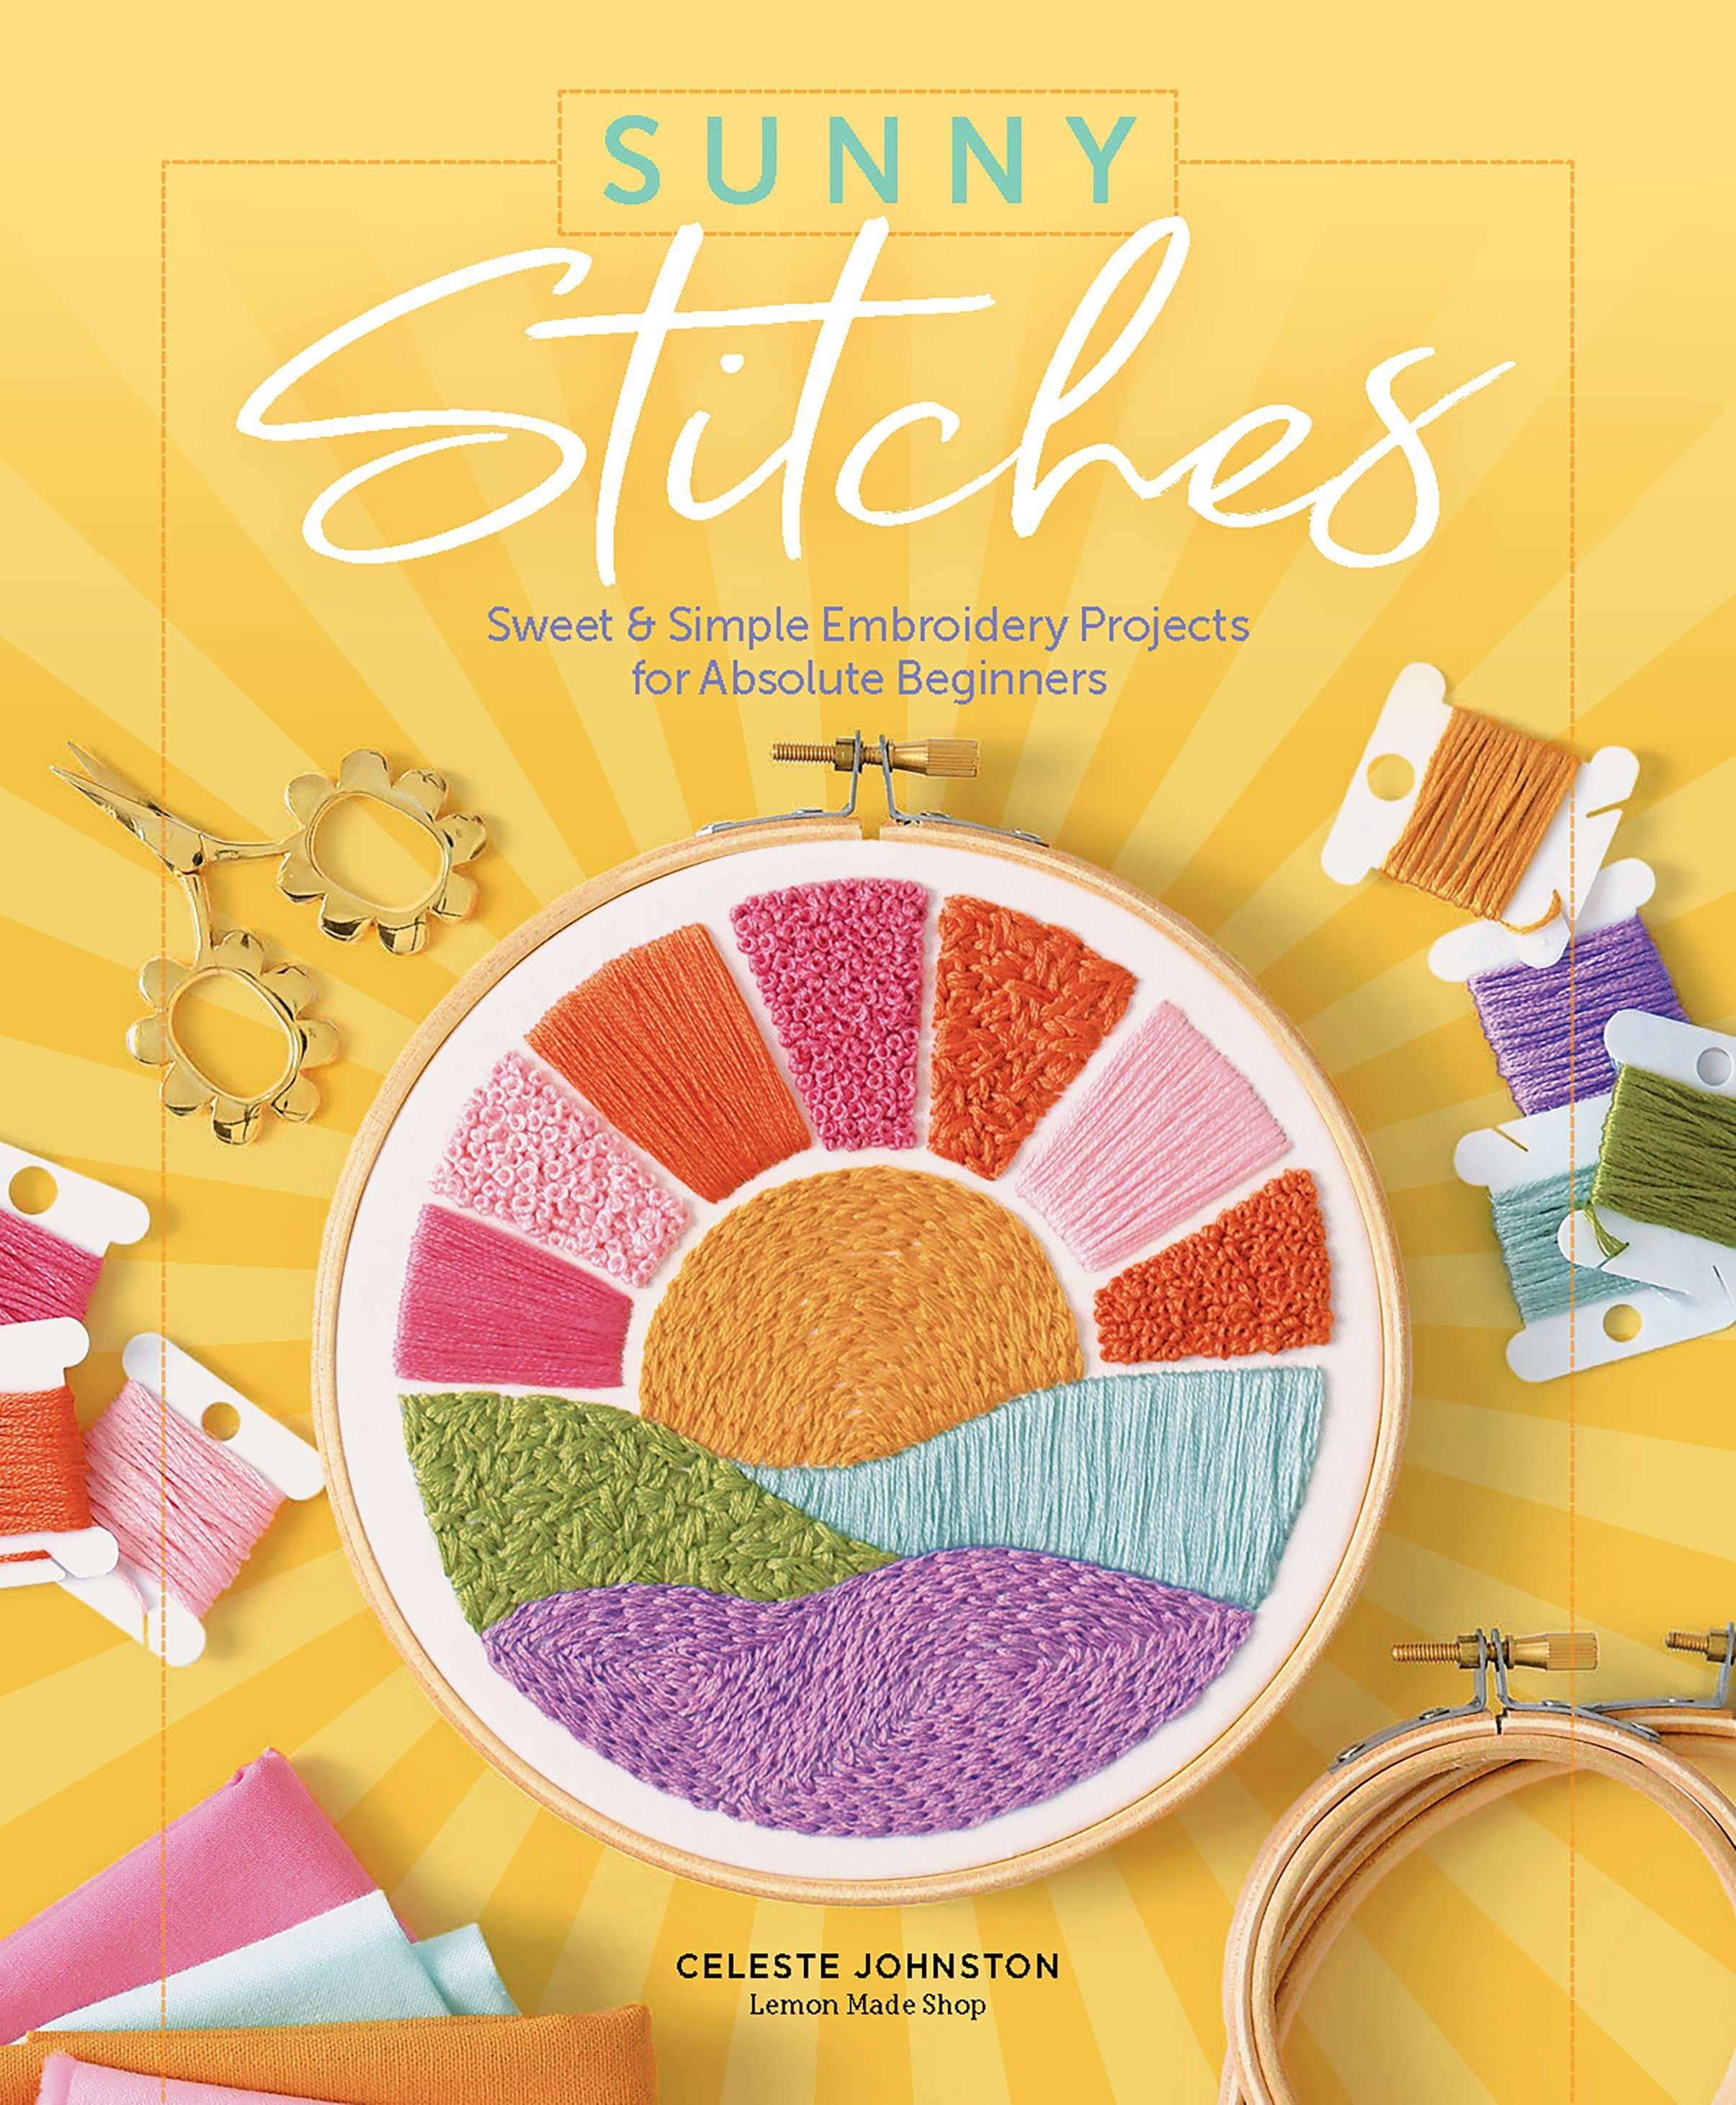 Sunny Stitches Sweet and Simple Embroidery Projects for Absolute